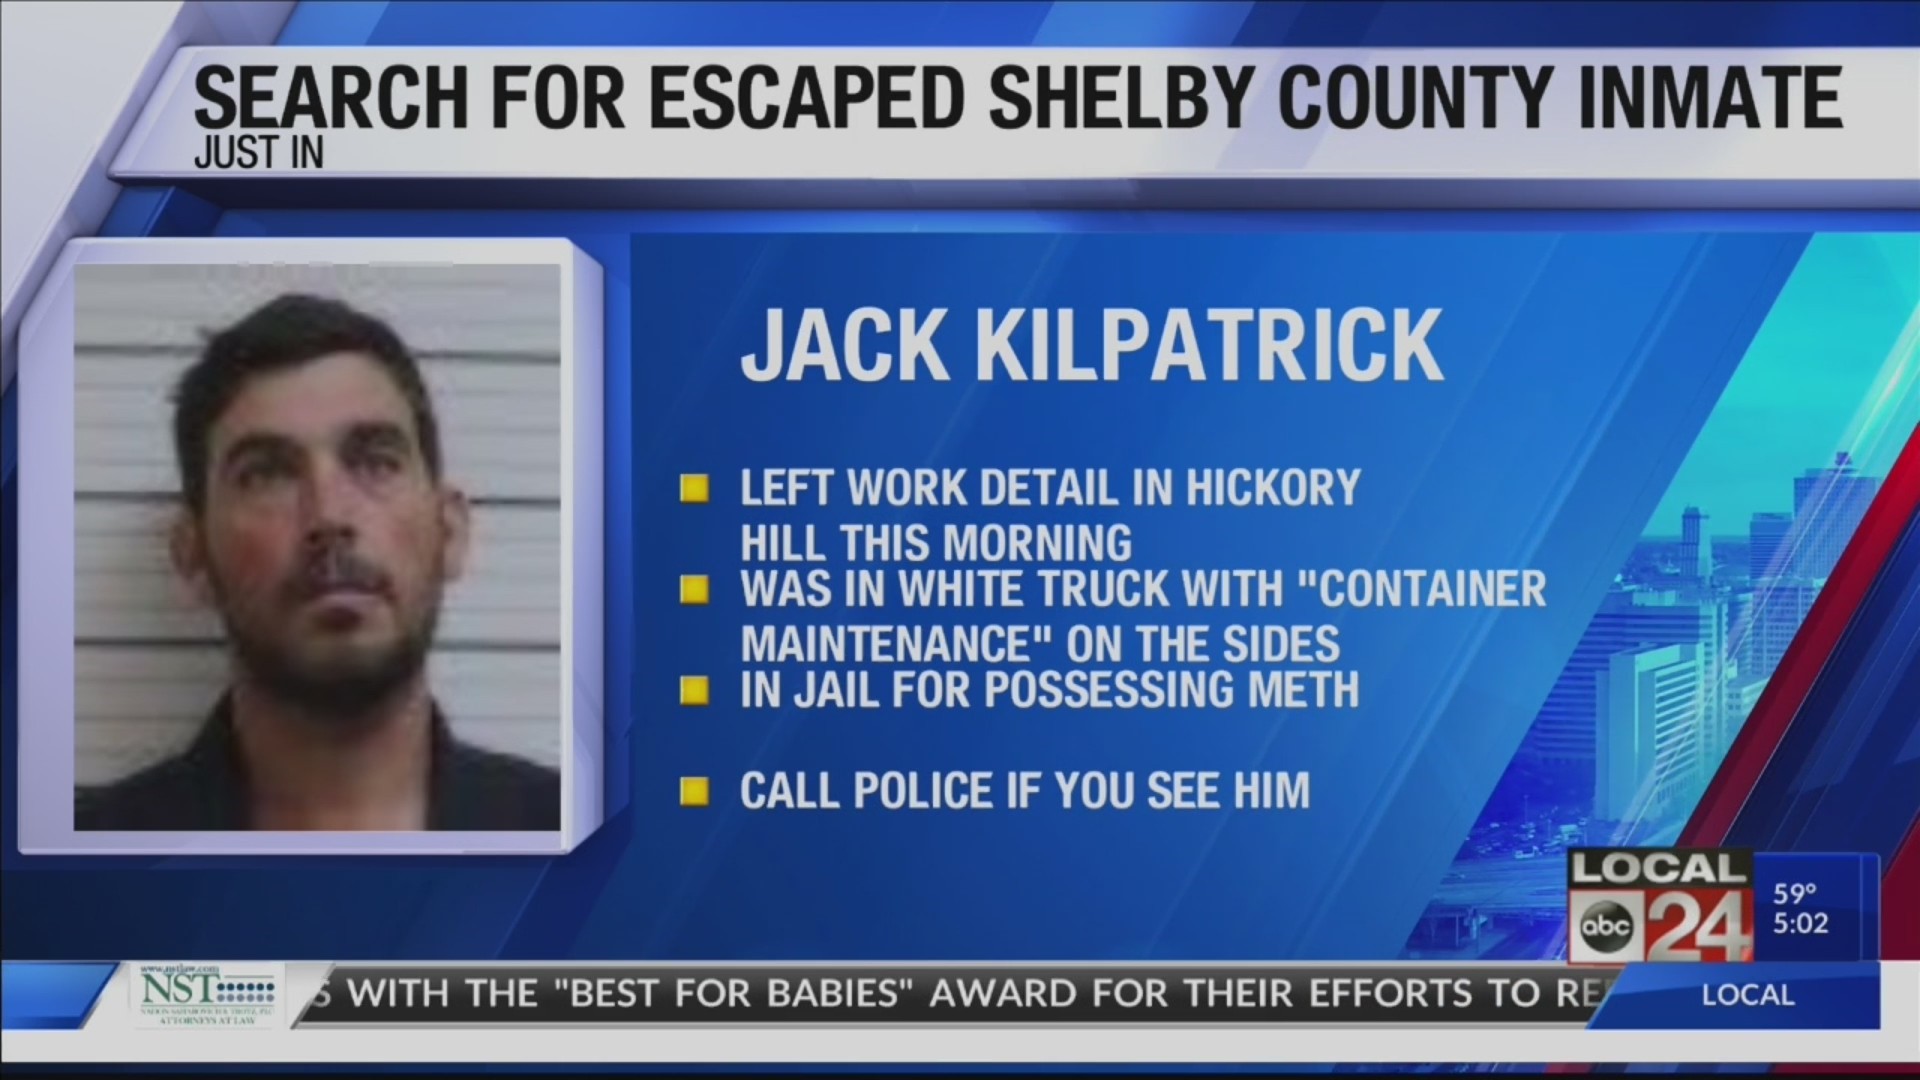 Search underway for Shelby County inmate who escaped while on work release